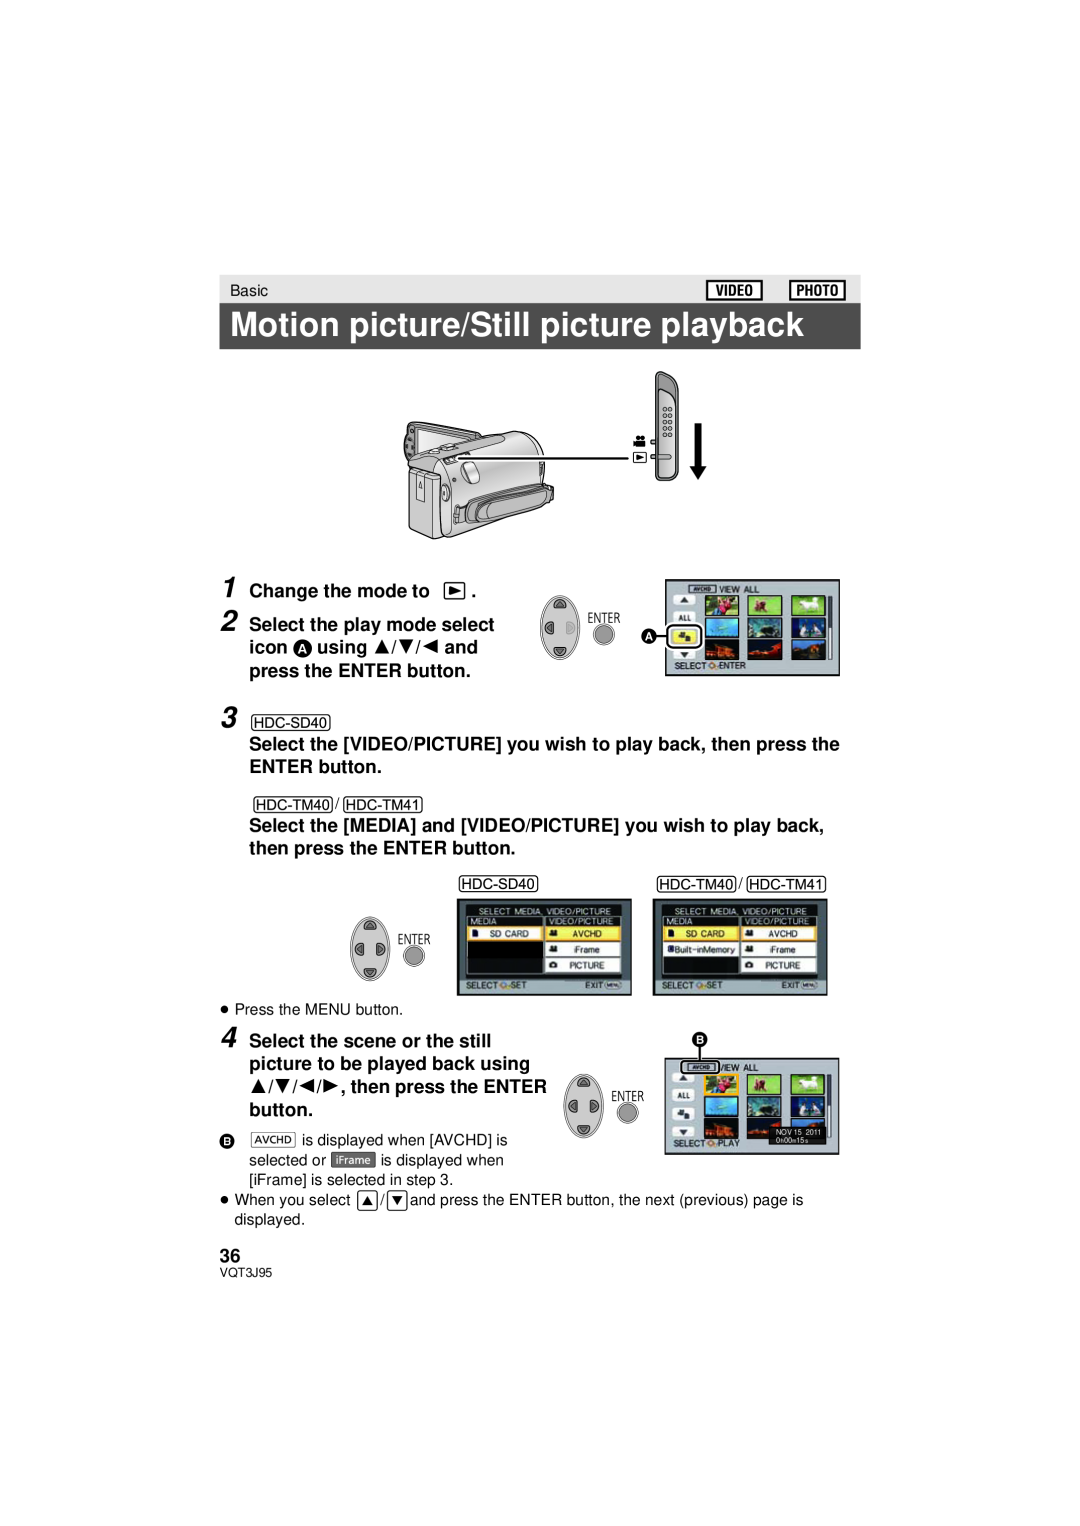 Panasonic HDC-SD40P/PC Motion picture/Still picture playback, Change the mode to, Select the play mode select, button 